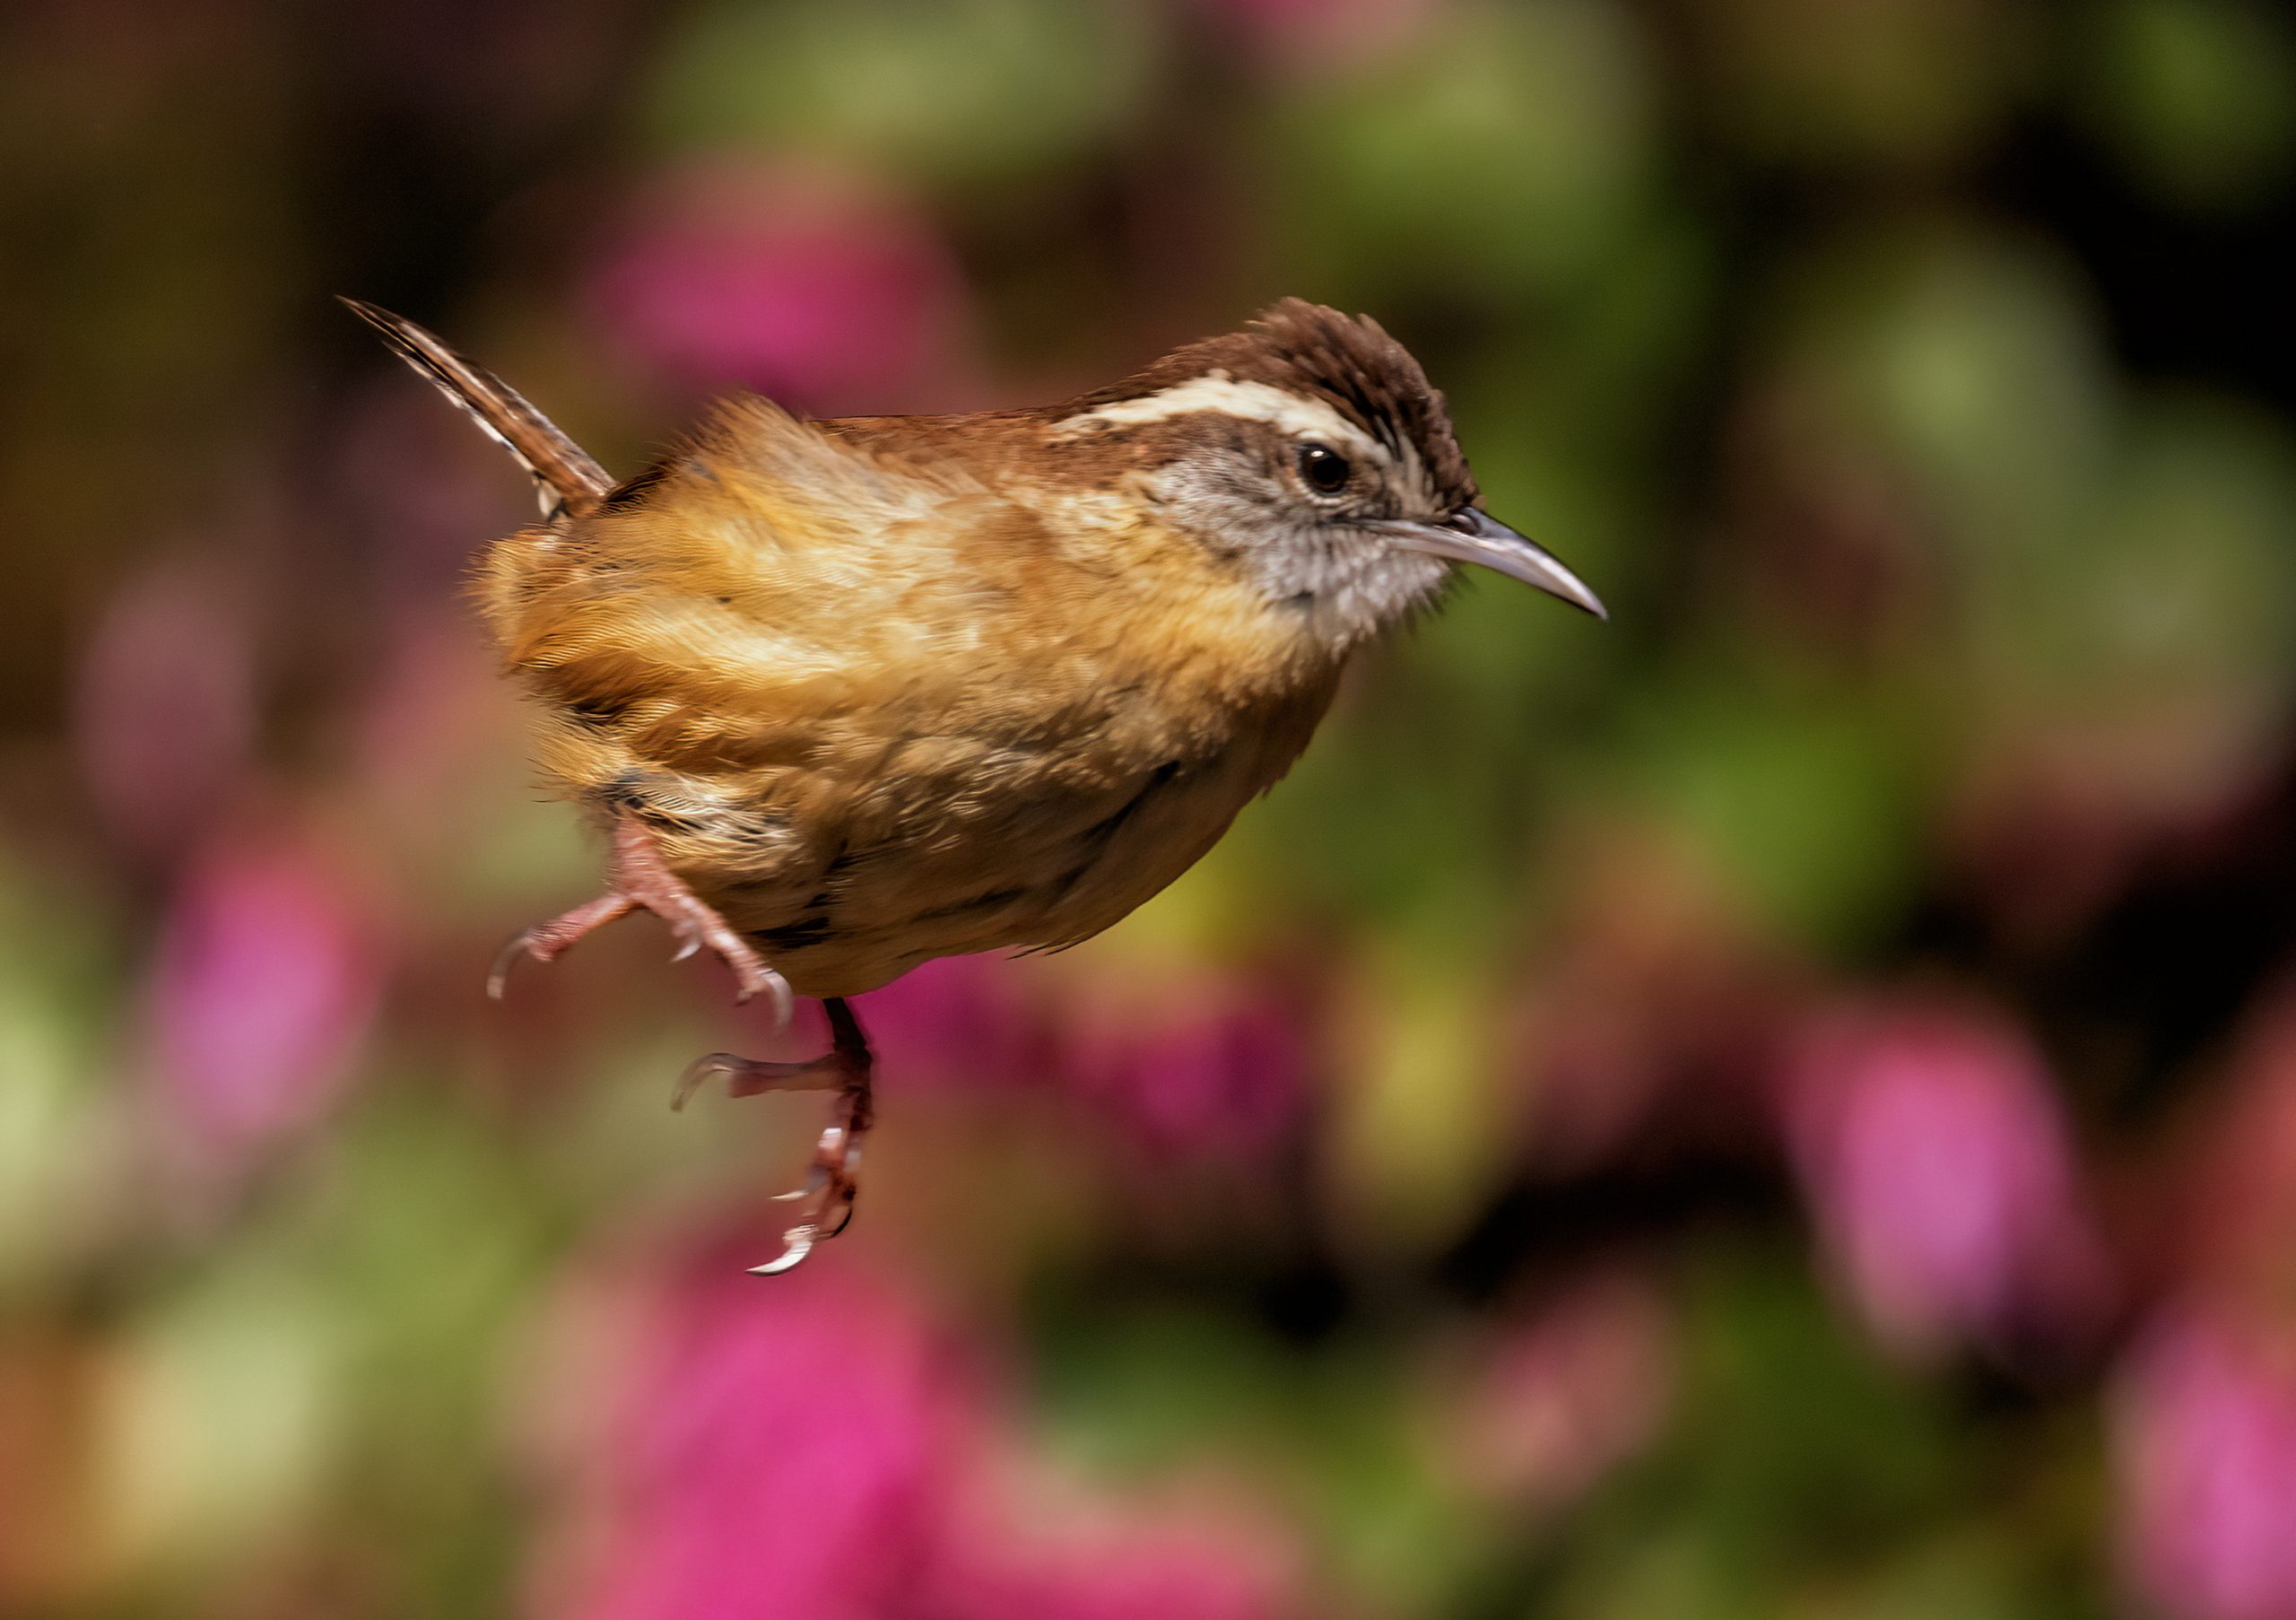 The South Carolina state songbird, the Carolina wren, jumps down from one perch to another. 